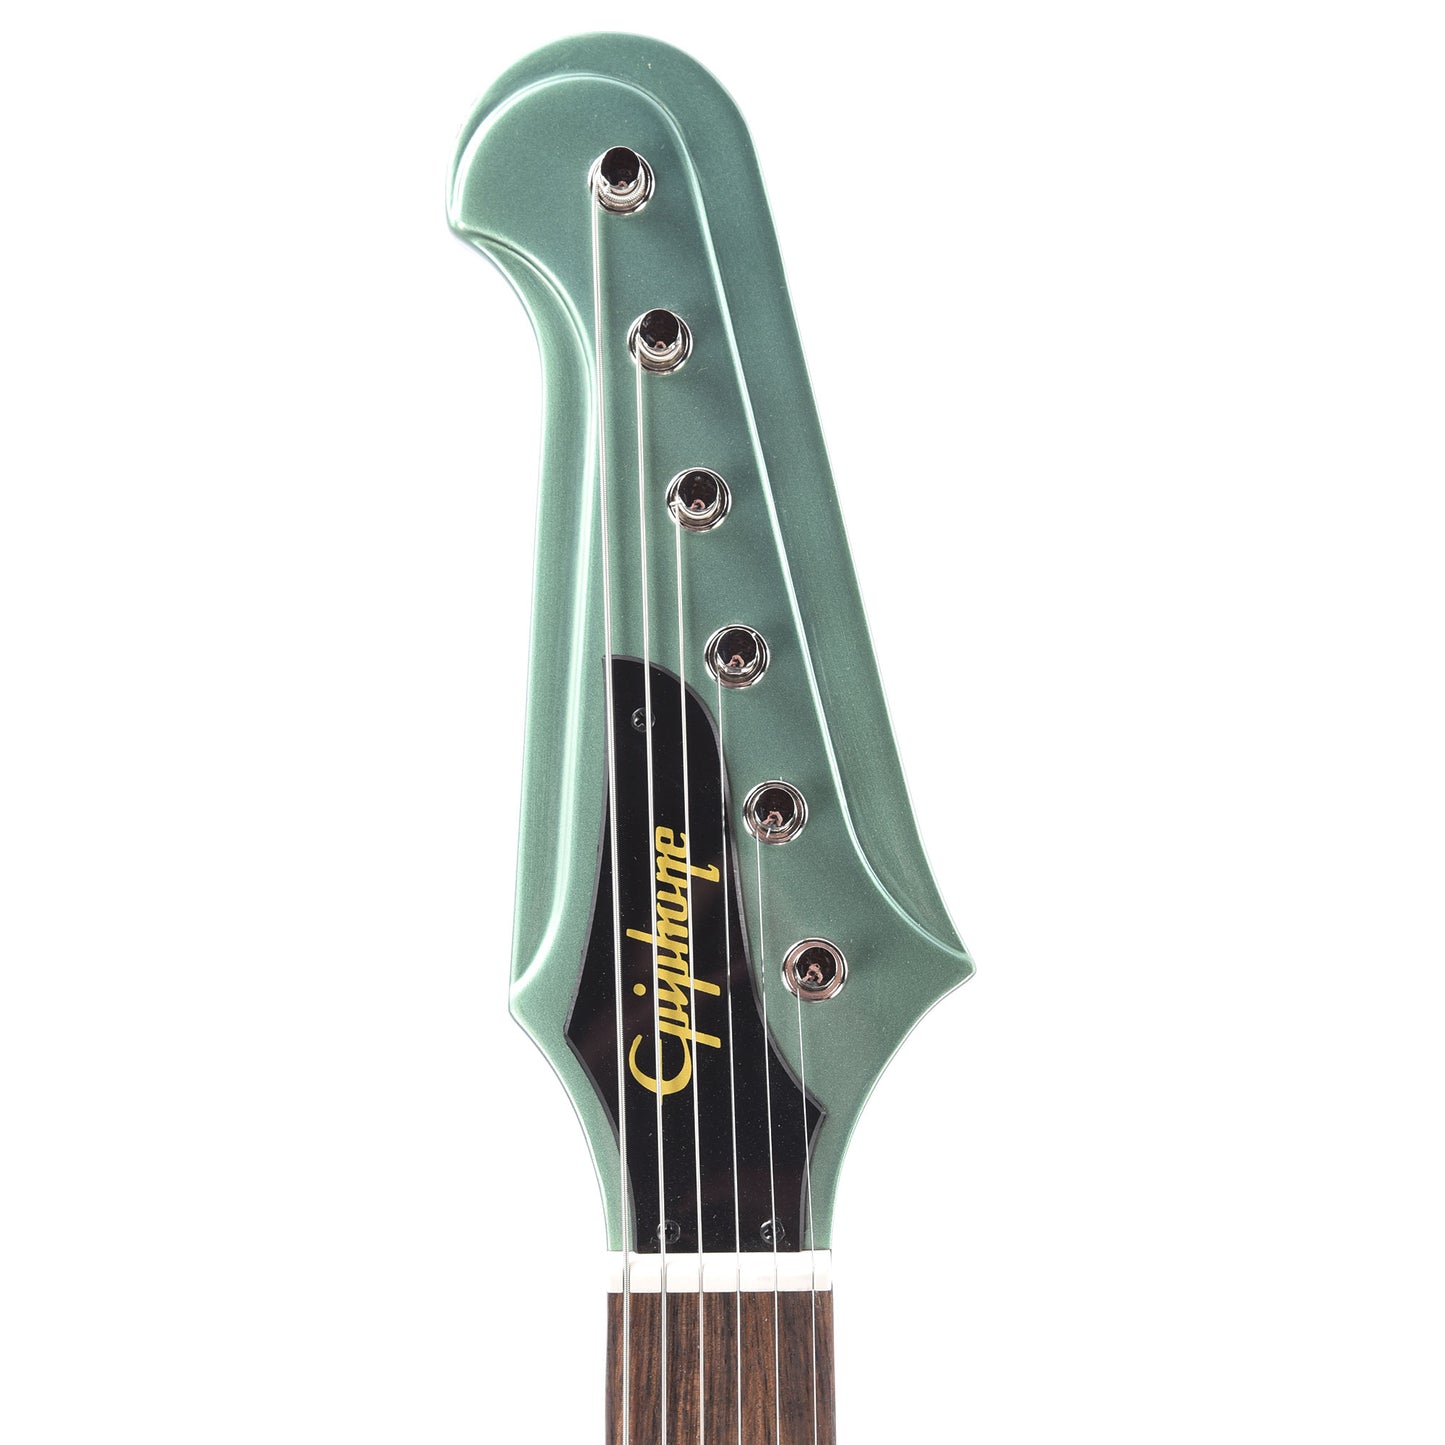 Epiphone Inspired by Gibson 1963 Firebird I Inverness Green